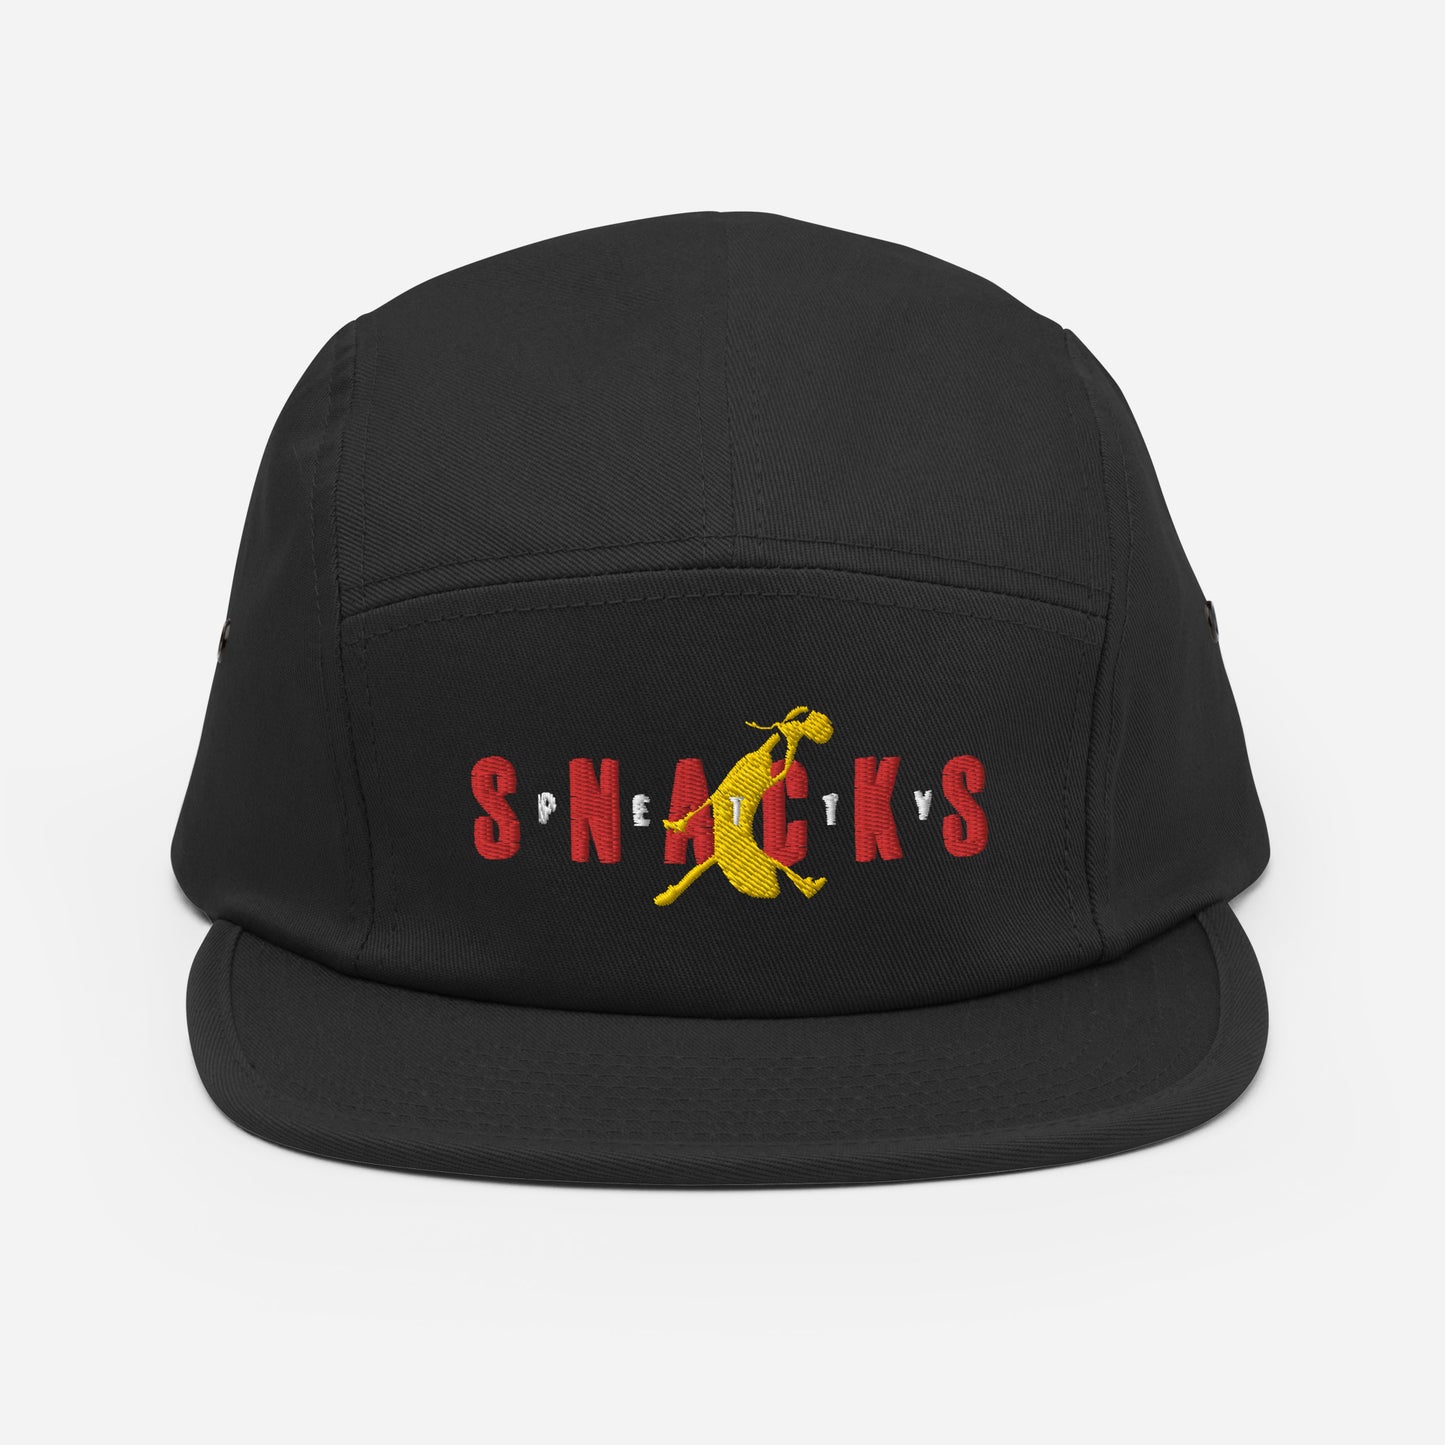 Black five panel hat, front panel has embroidered graphic. "Petty Snacks" with a jumpan inspired logo that is a yellow banana duking a bong. The word "Snacks" is big and spread across front in red. The word "PETTY" is small lettering, with each letter in between the letter of "Snacks" and over the banana. Logo is inspired by jumpman graphic